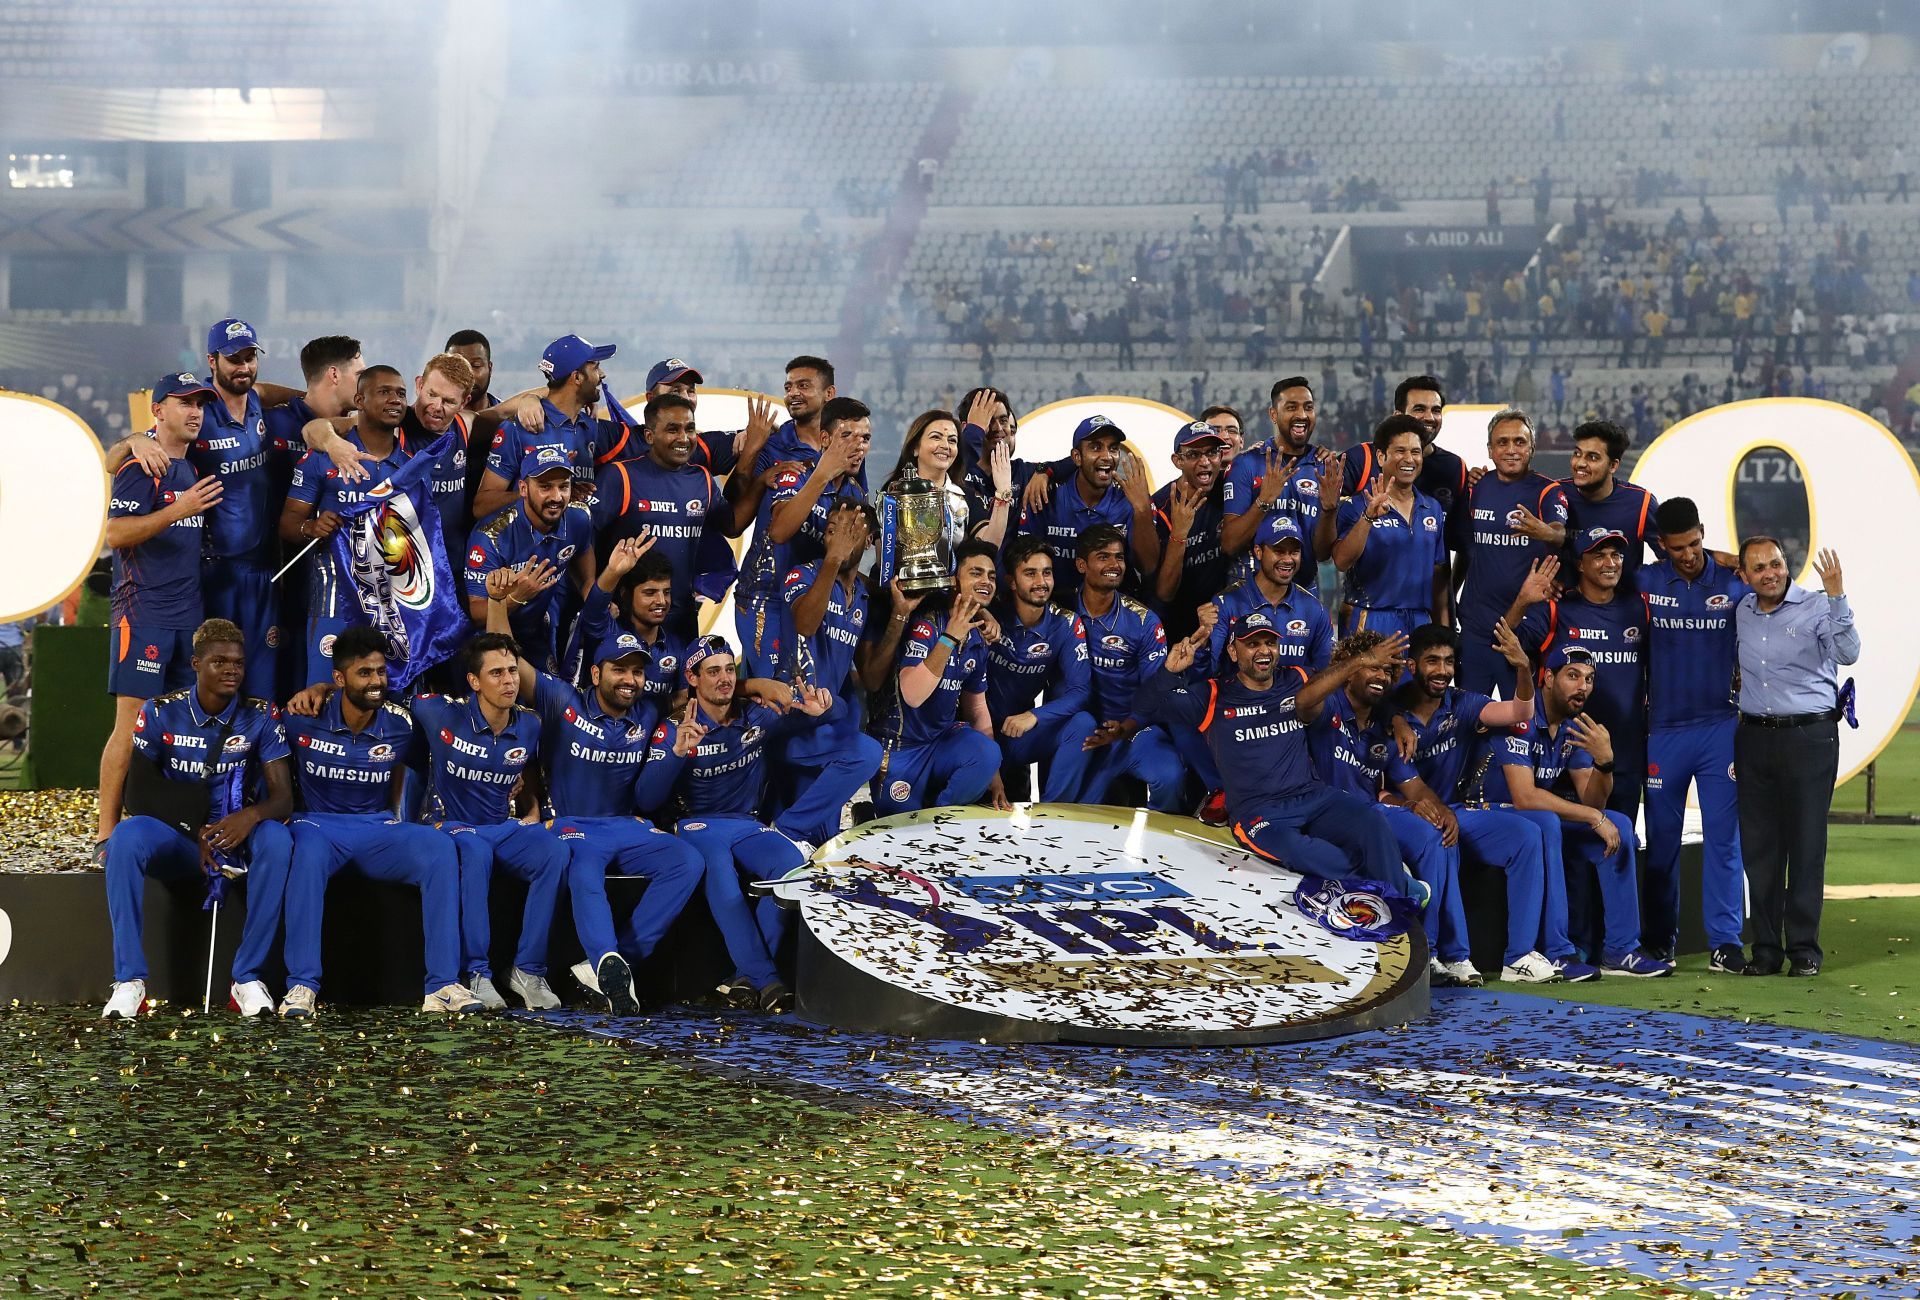 Mumbai Indians have won the IPL trophy on 5 occasions.